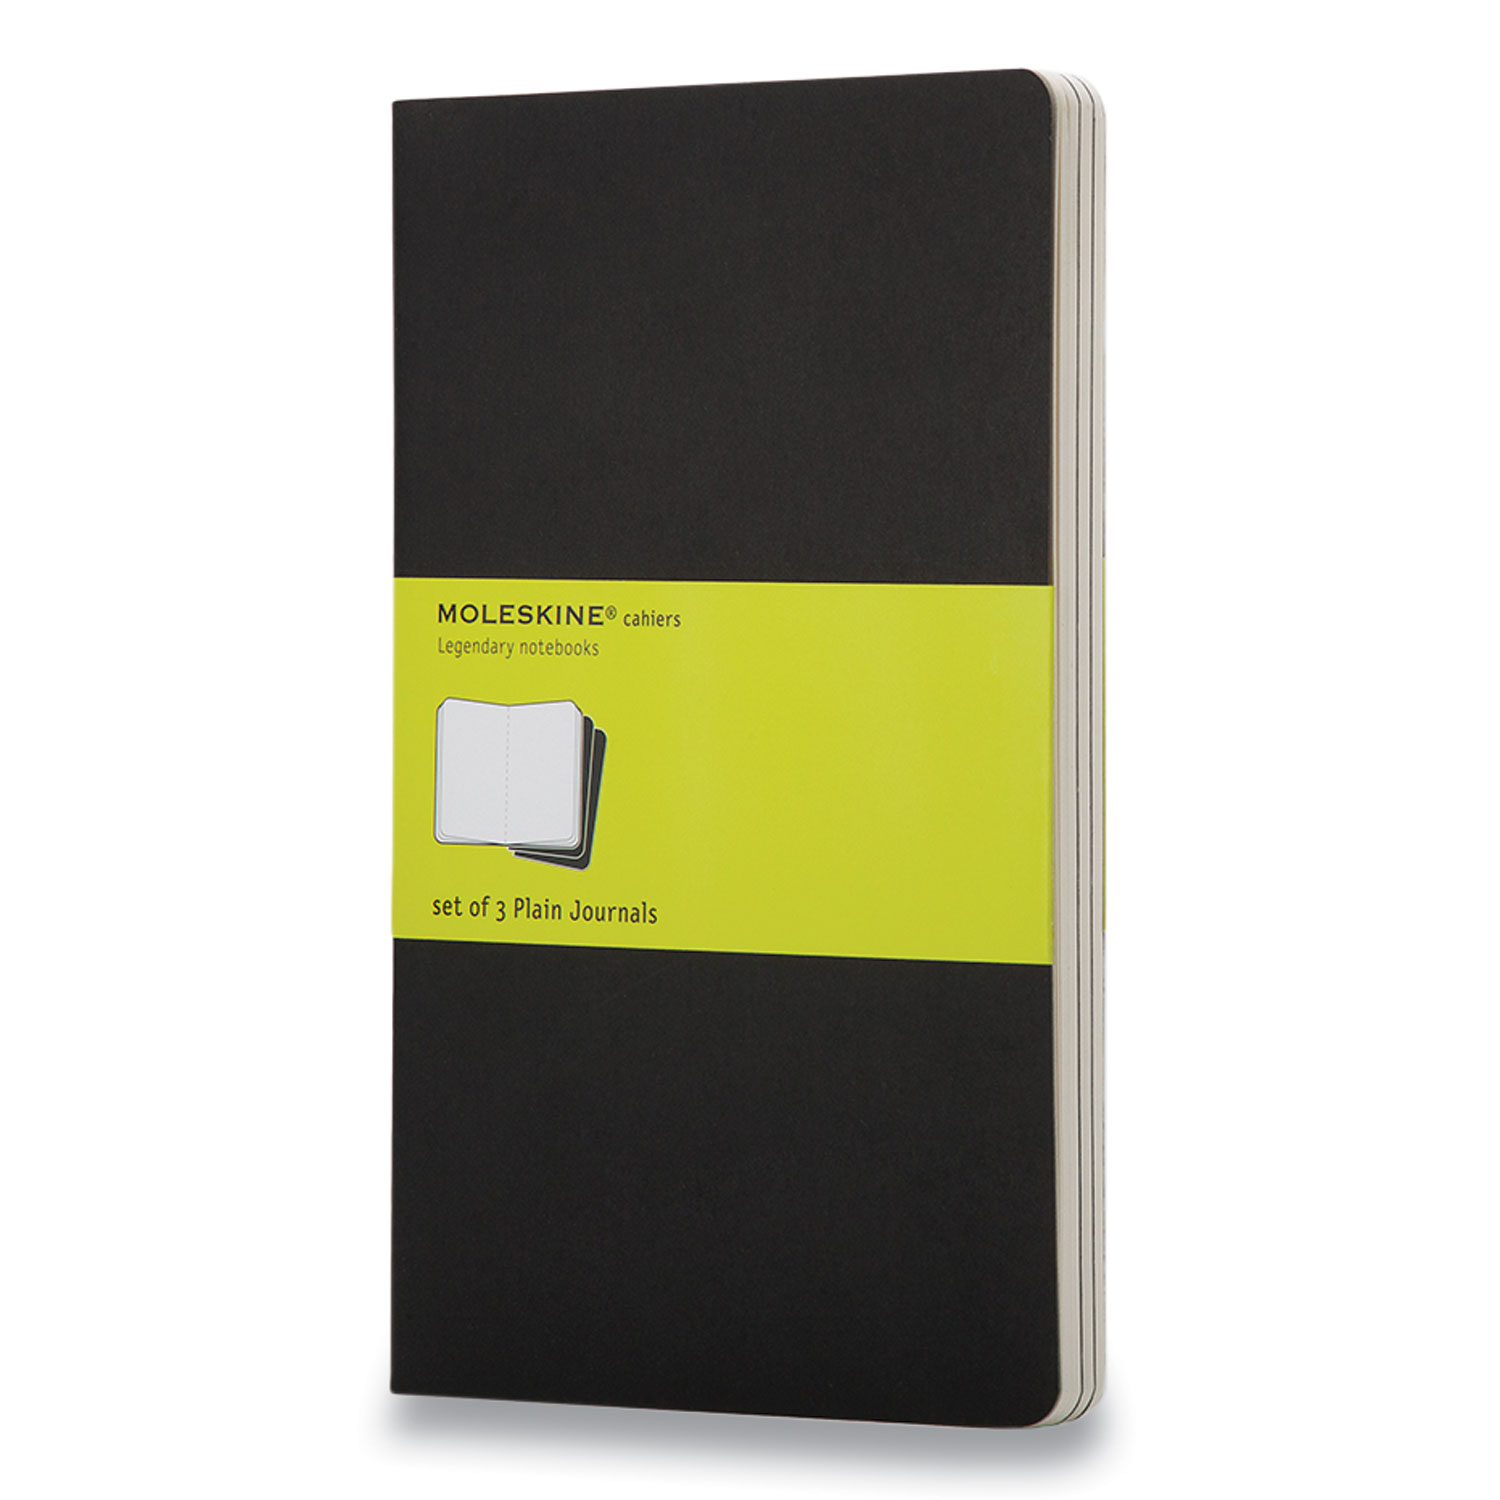  Moleskine 704918XX Cahier Journal, Unruled, Black Cover 5.5 x 3.5, 64 Pages, 3/Pack (HBG2639188) 